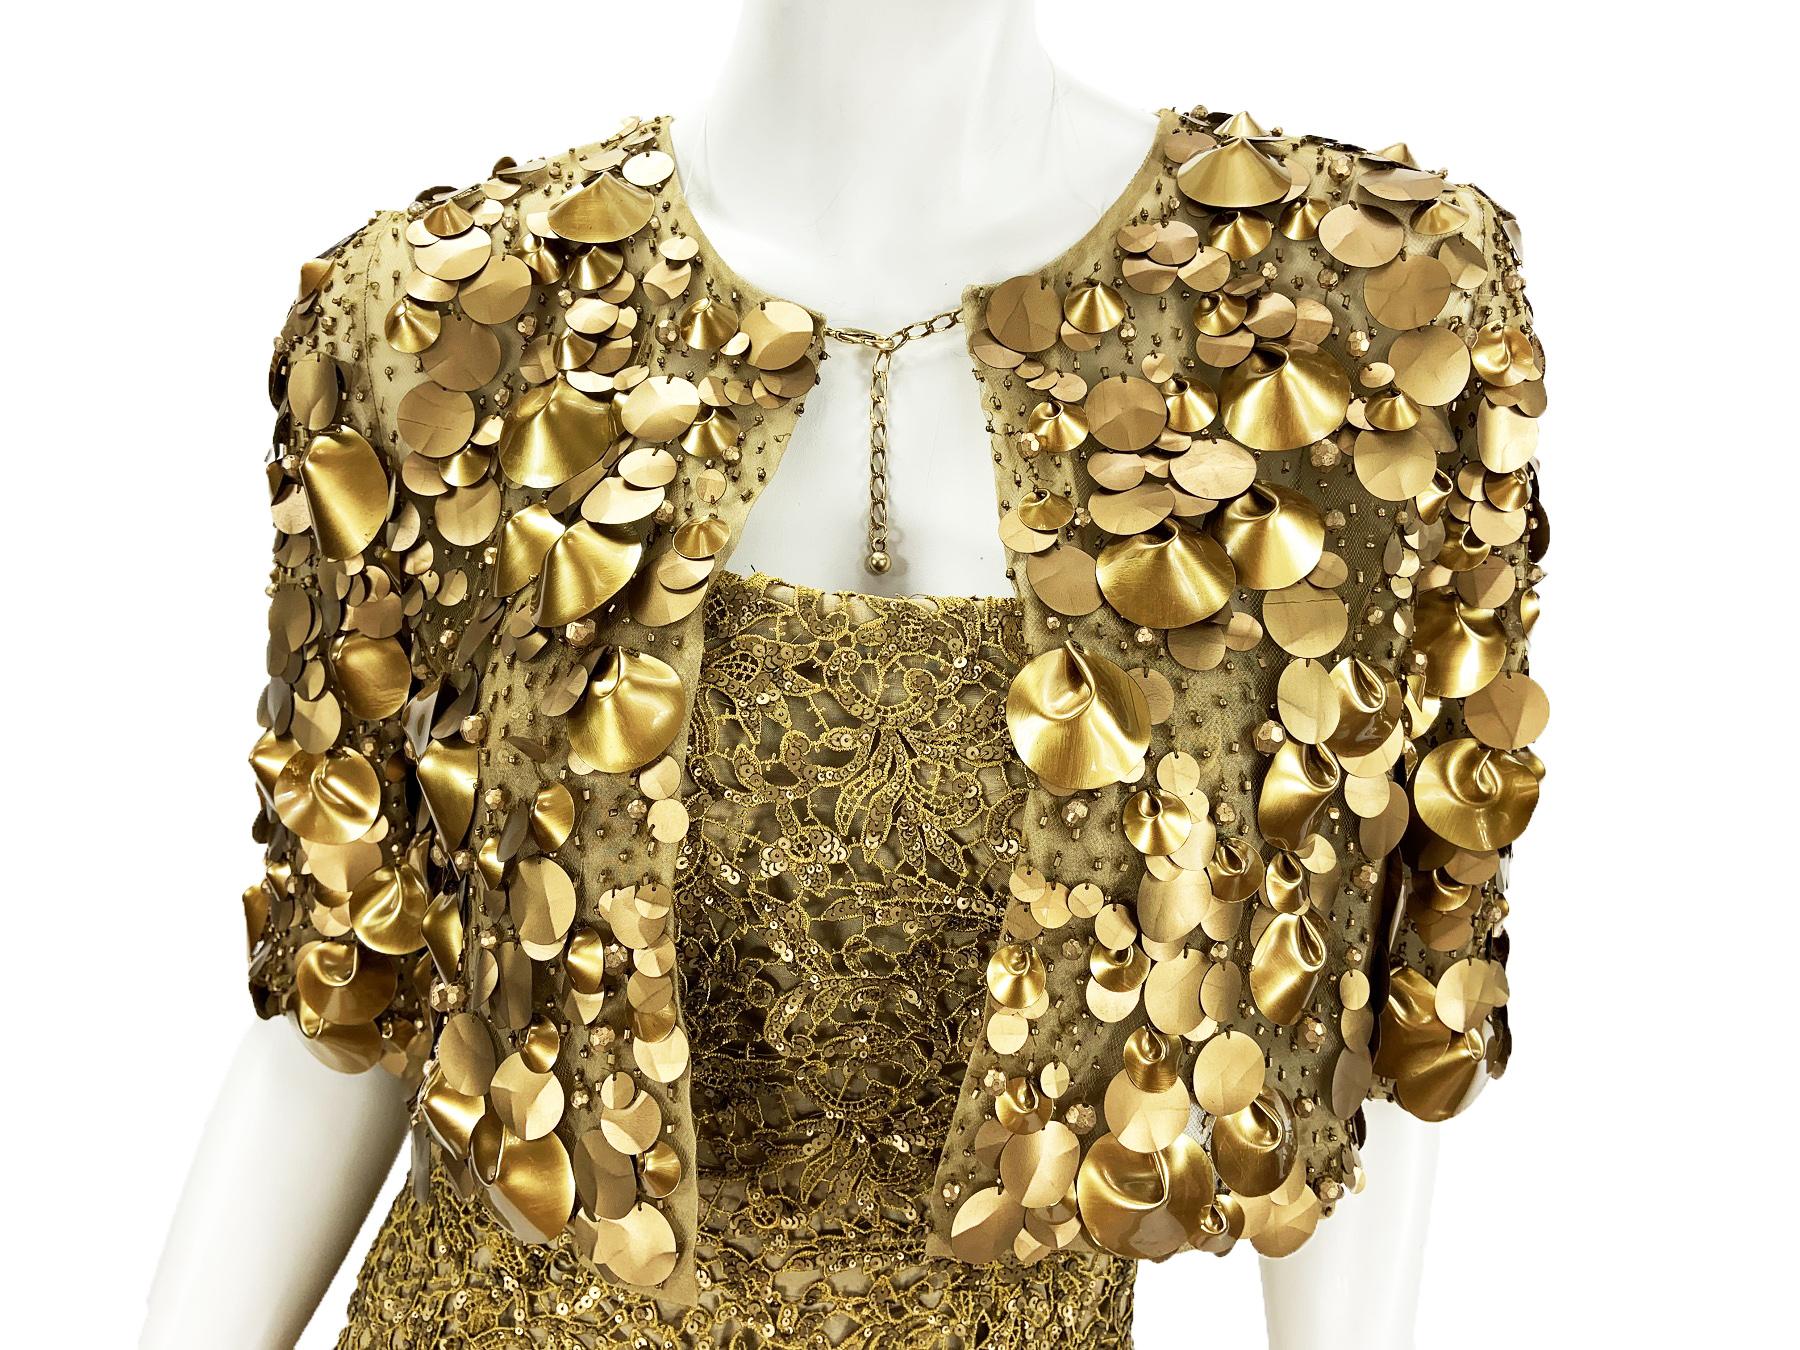 Oscar De La Renta PF 2012 Gold Lace Sequin Embellished Dress Gown + Jacket  In Excellent Condition For Sale In Montgomery, TX